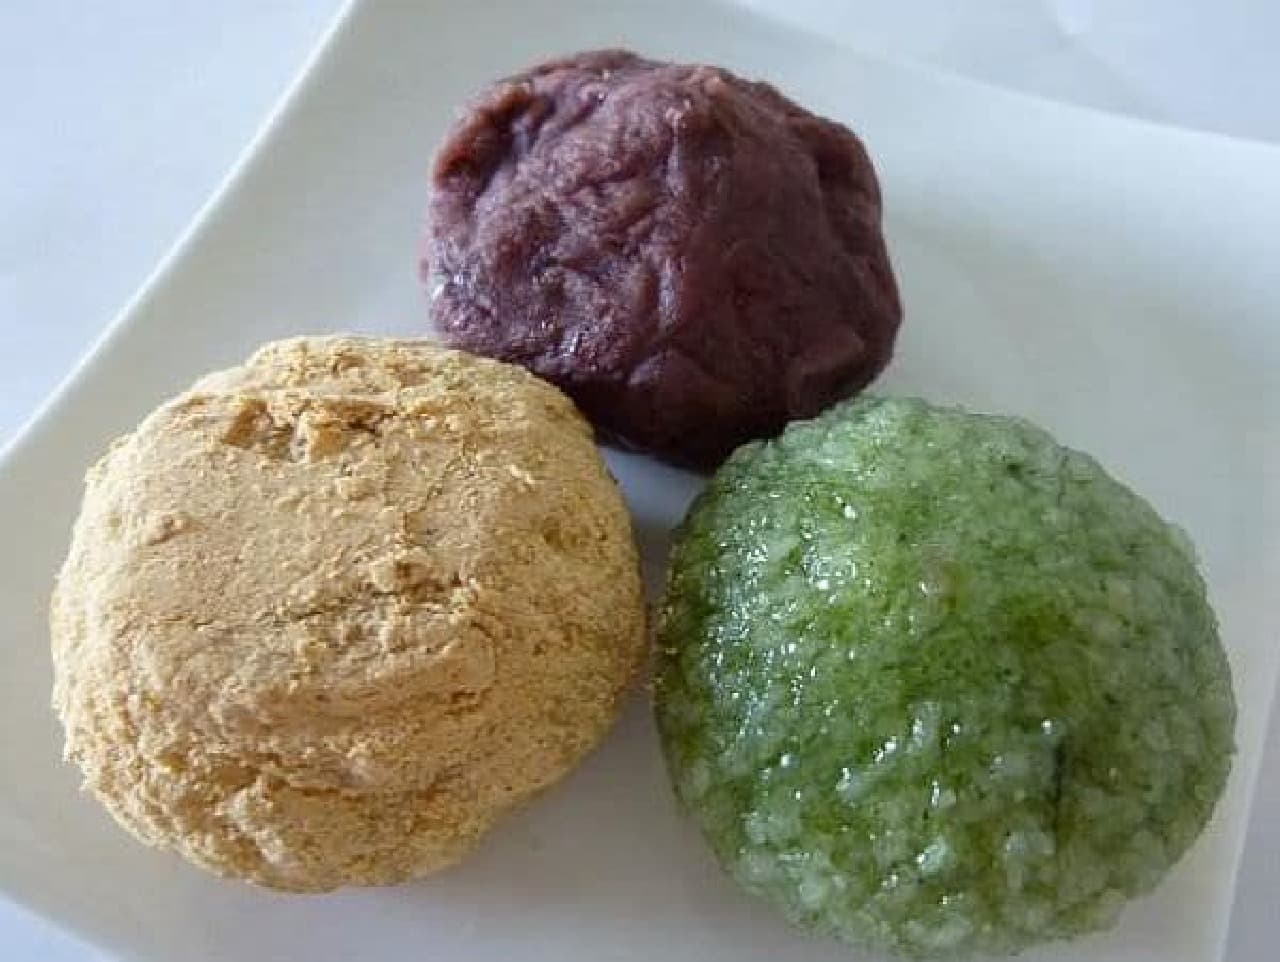 "Aoyama style brown sugar ohagi (grain bean paste, wormwood, kinako)" with the concept of sweets that are kind to the body